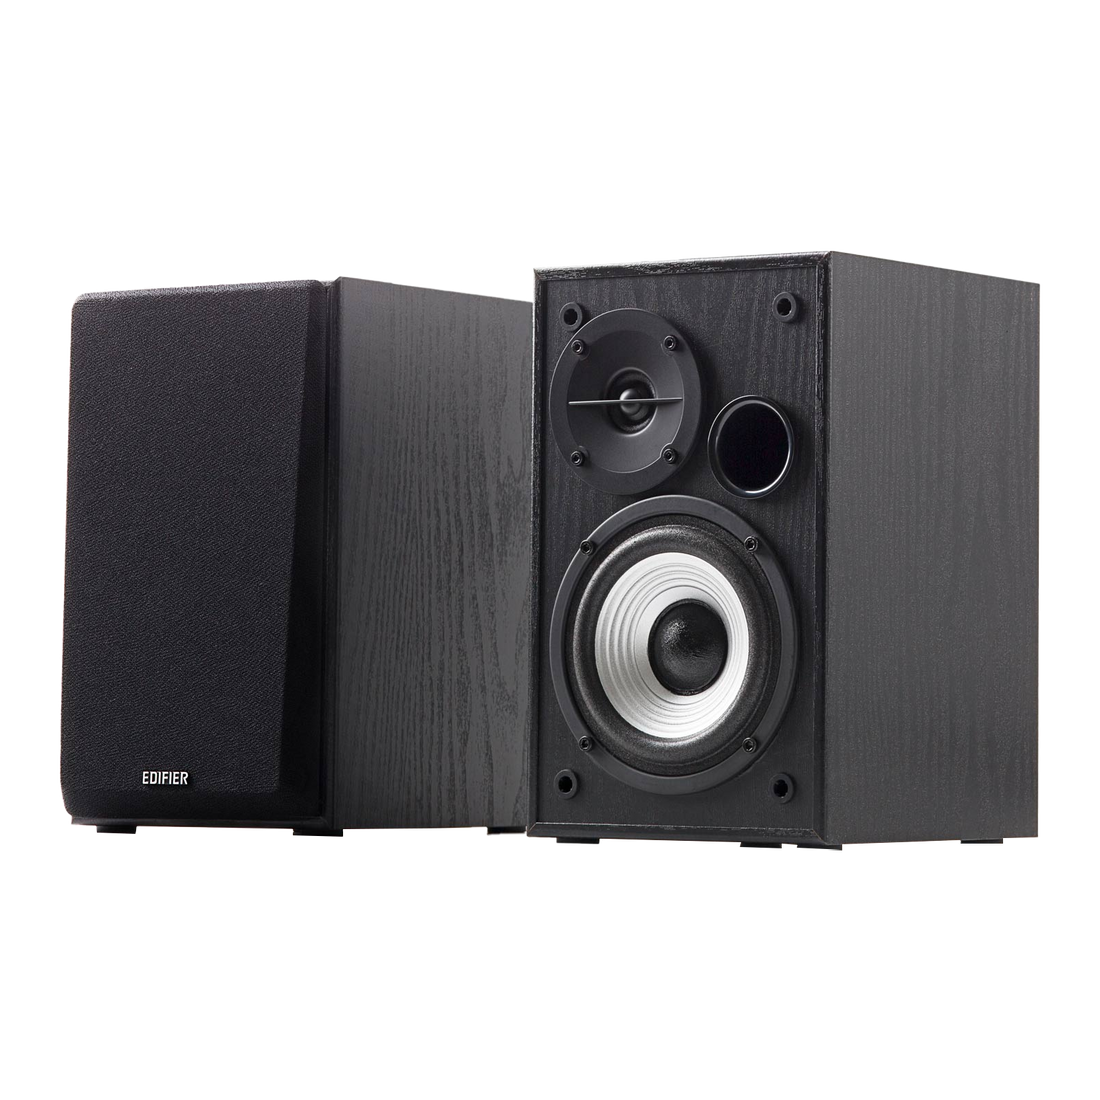 R980T Studio-quality 2.0 speaker system with dual RCA input